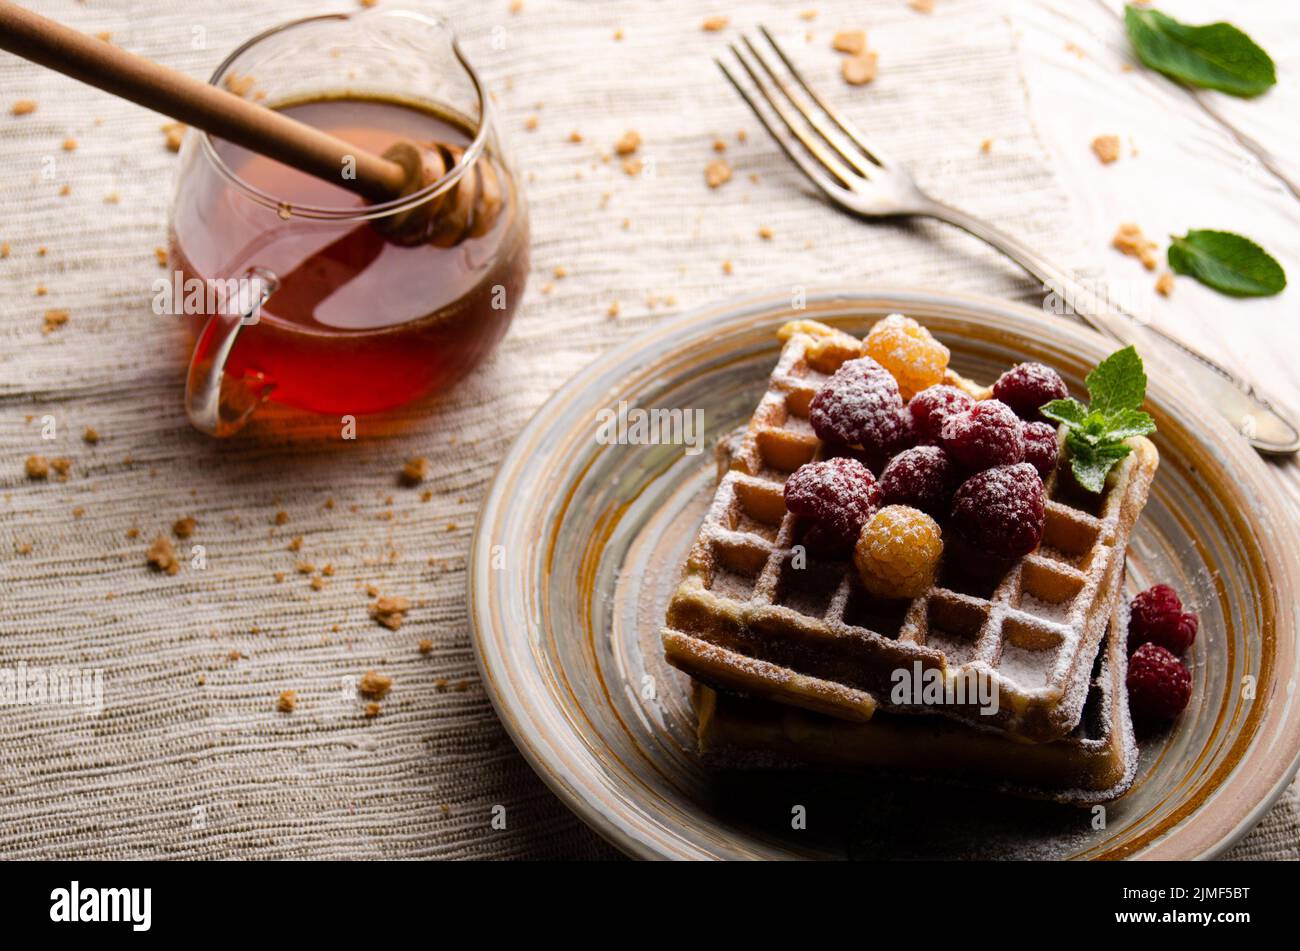 Belgian waffles served with raspberries and mint leaf dusted with powdered sugar on white wooden kitchen table with syrup aside. Stock Photo